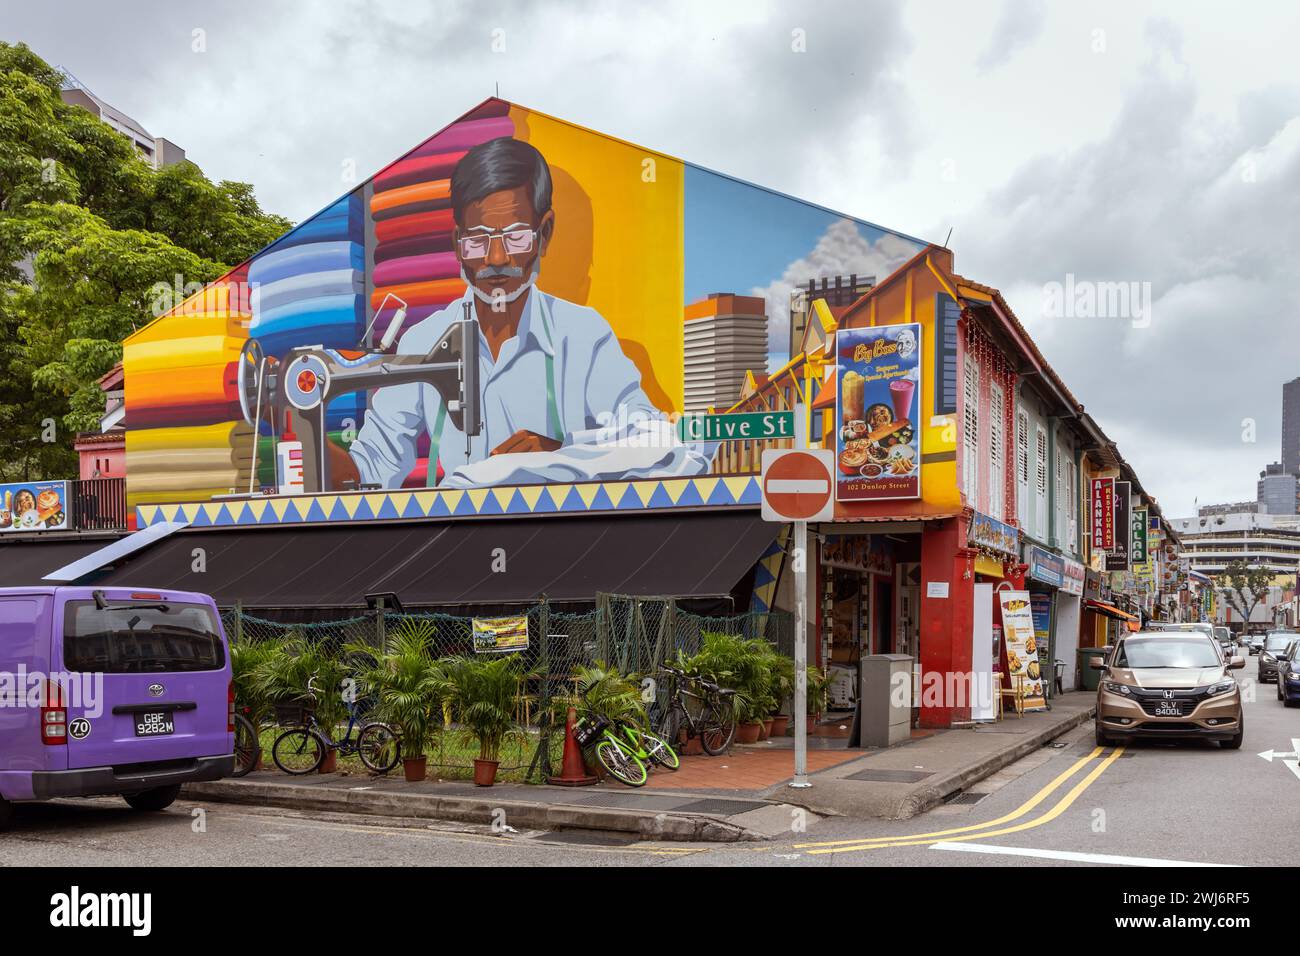 Clive Street in Little India district, Singapore Stock Photo